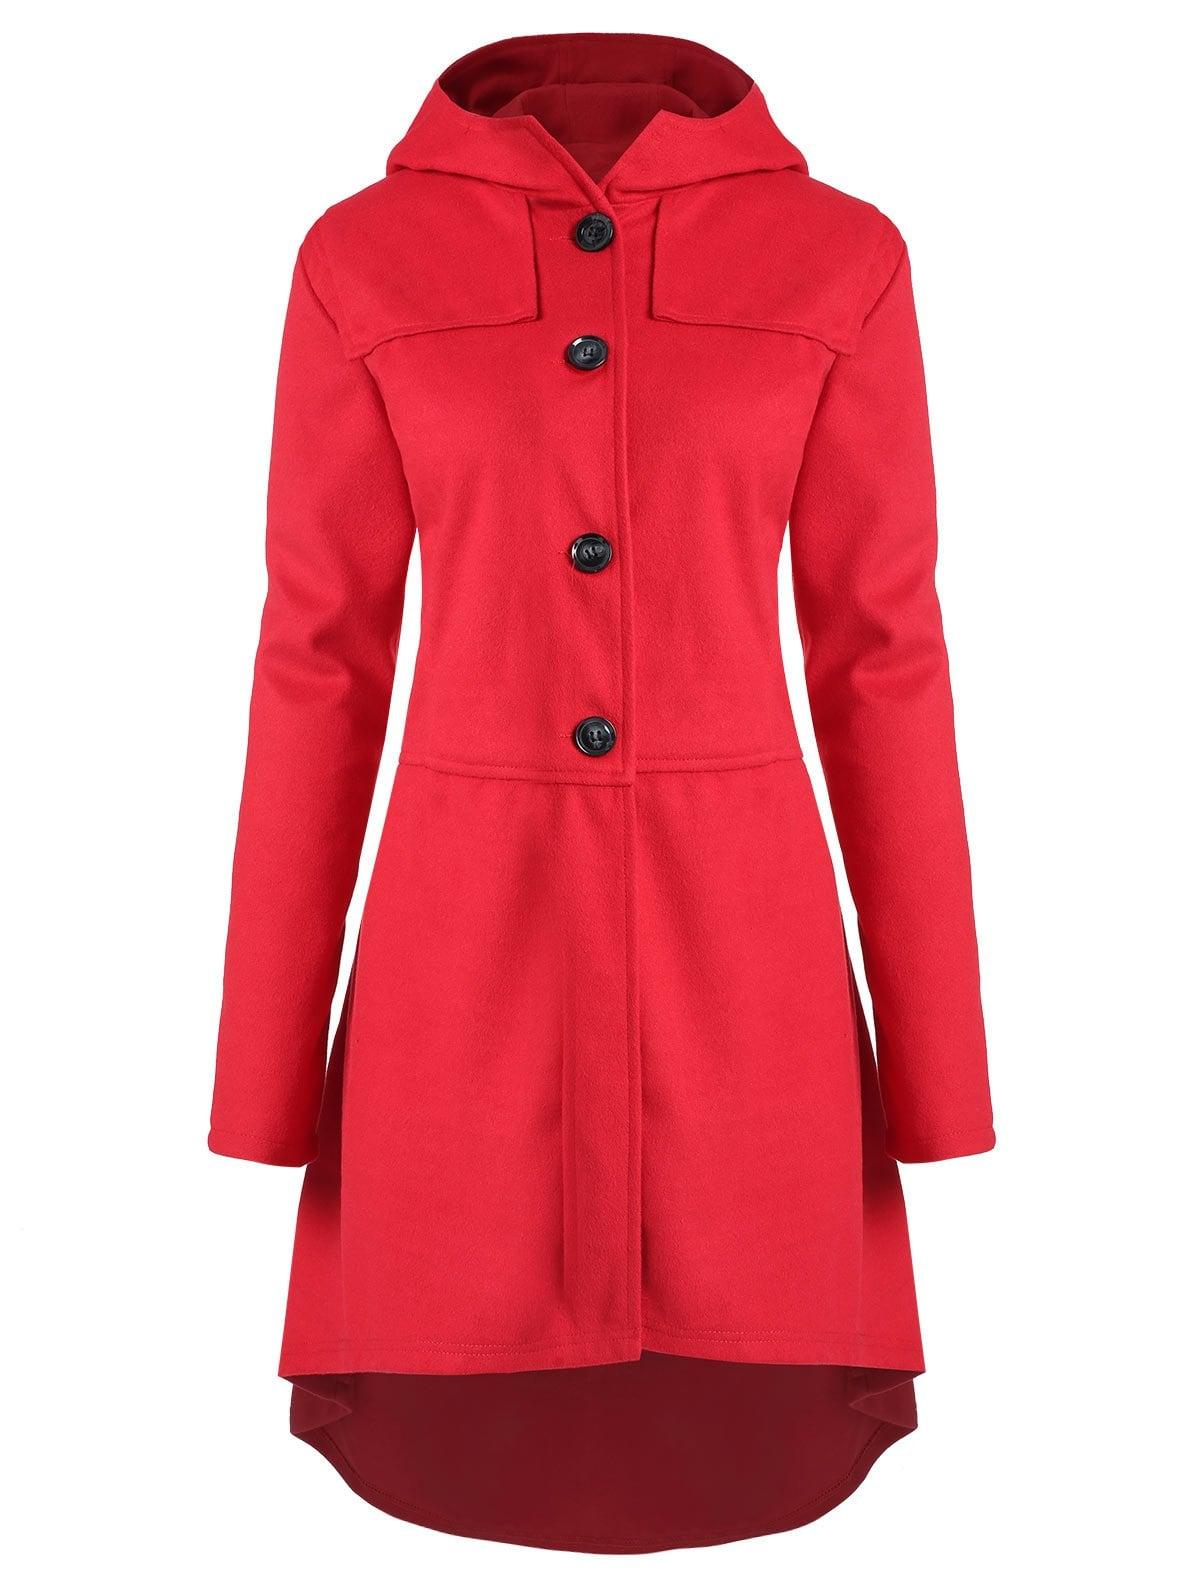 Rosegal Wool Plus Size High Low Hooded Coat With Button Fly in Red - Lyst